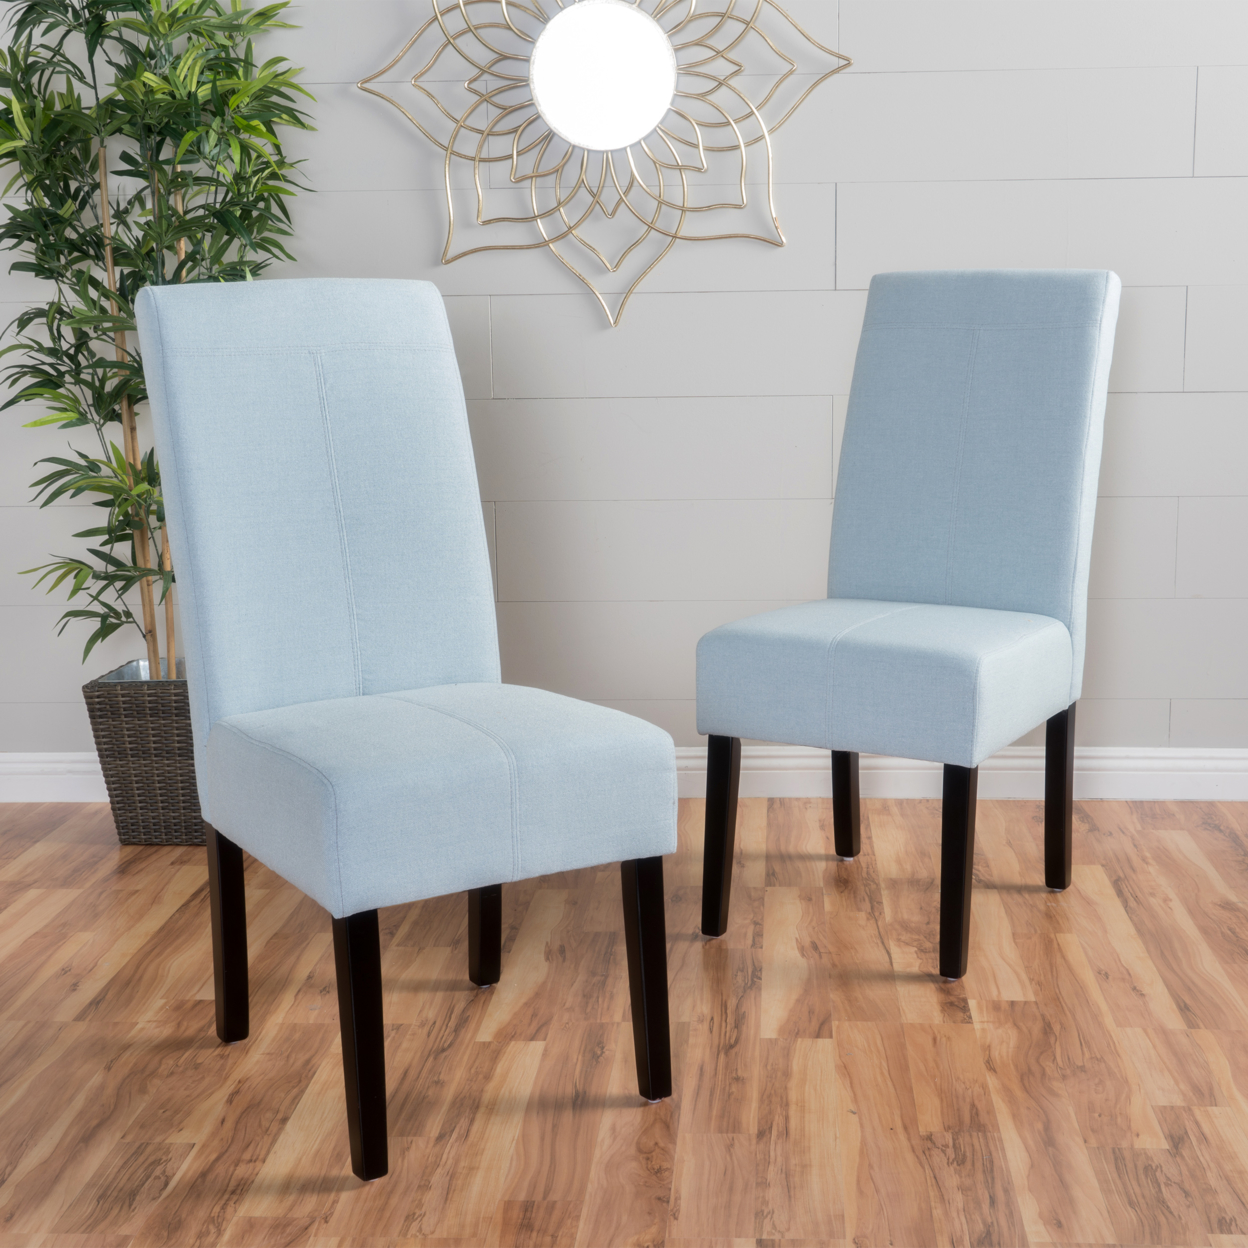 Lissa Contemporary T-Stitch Upholstered Dining Chairs (Set Of 2) - Light Sky, Fabric